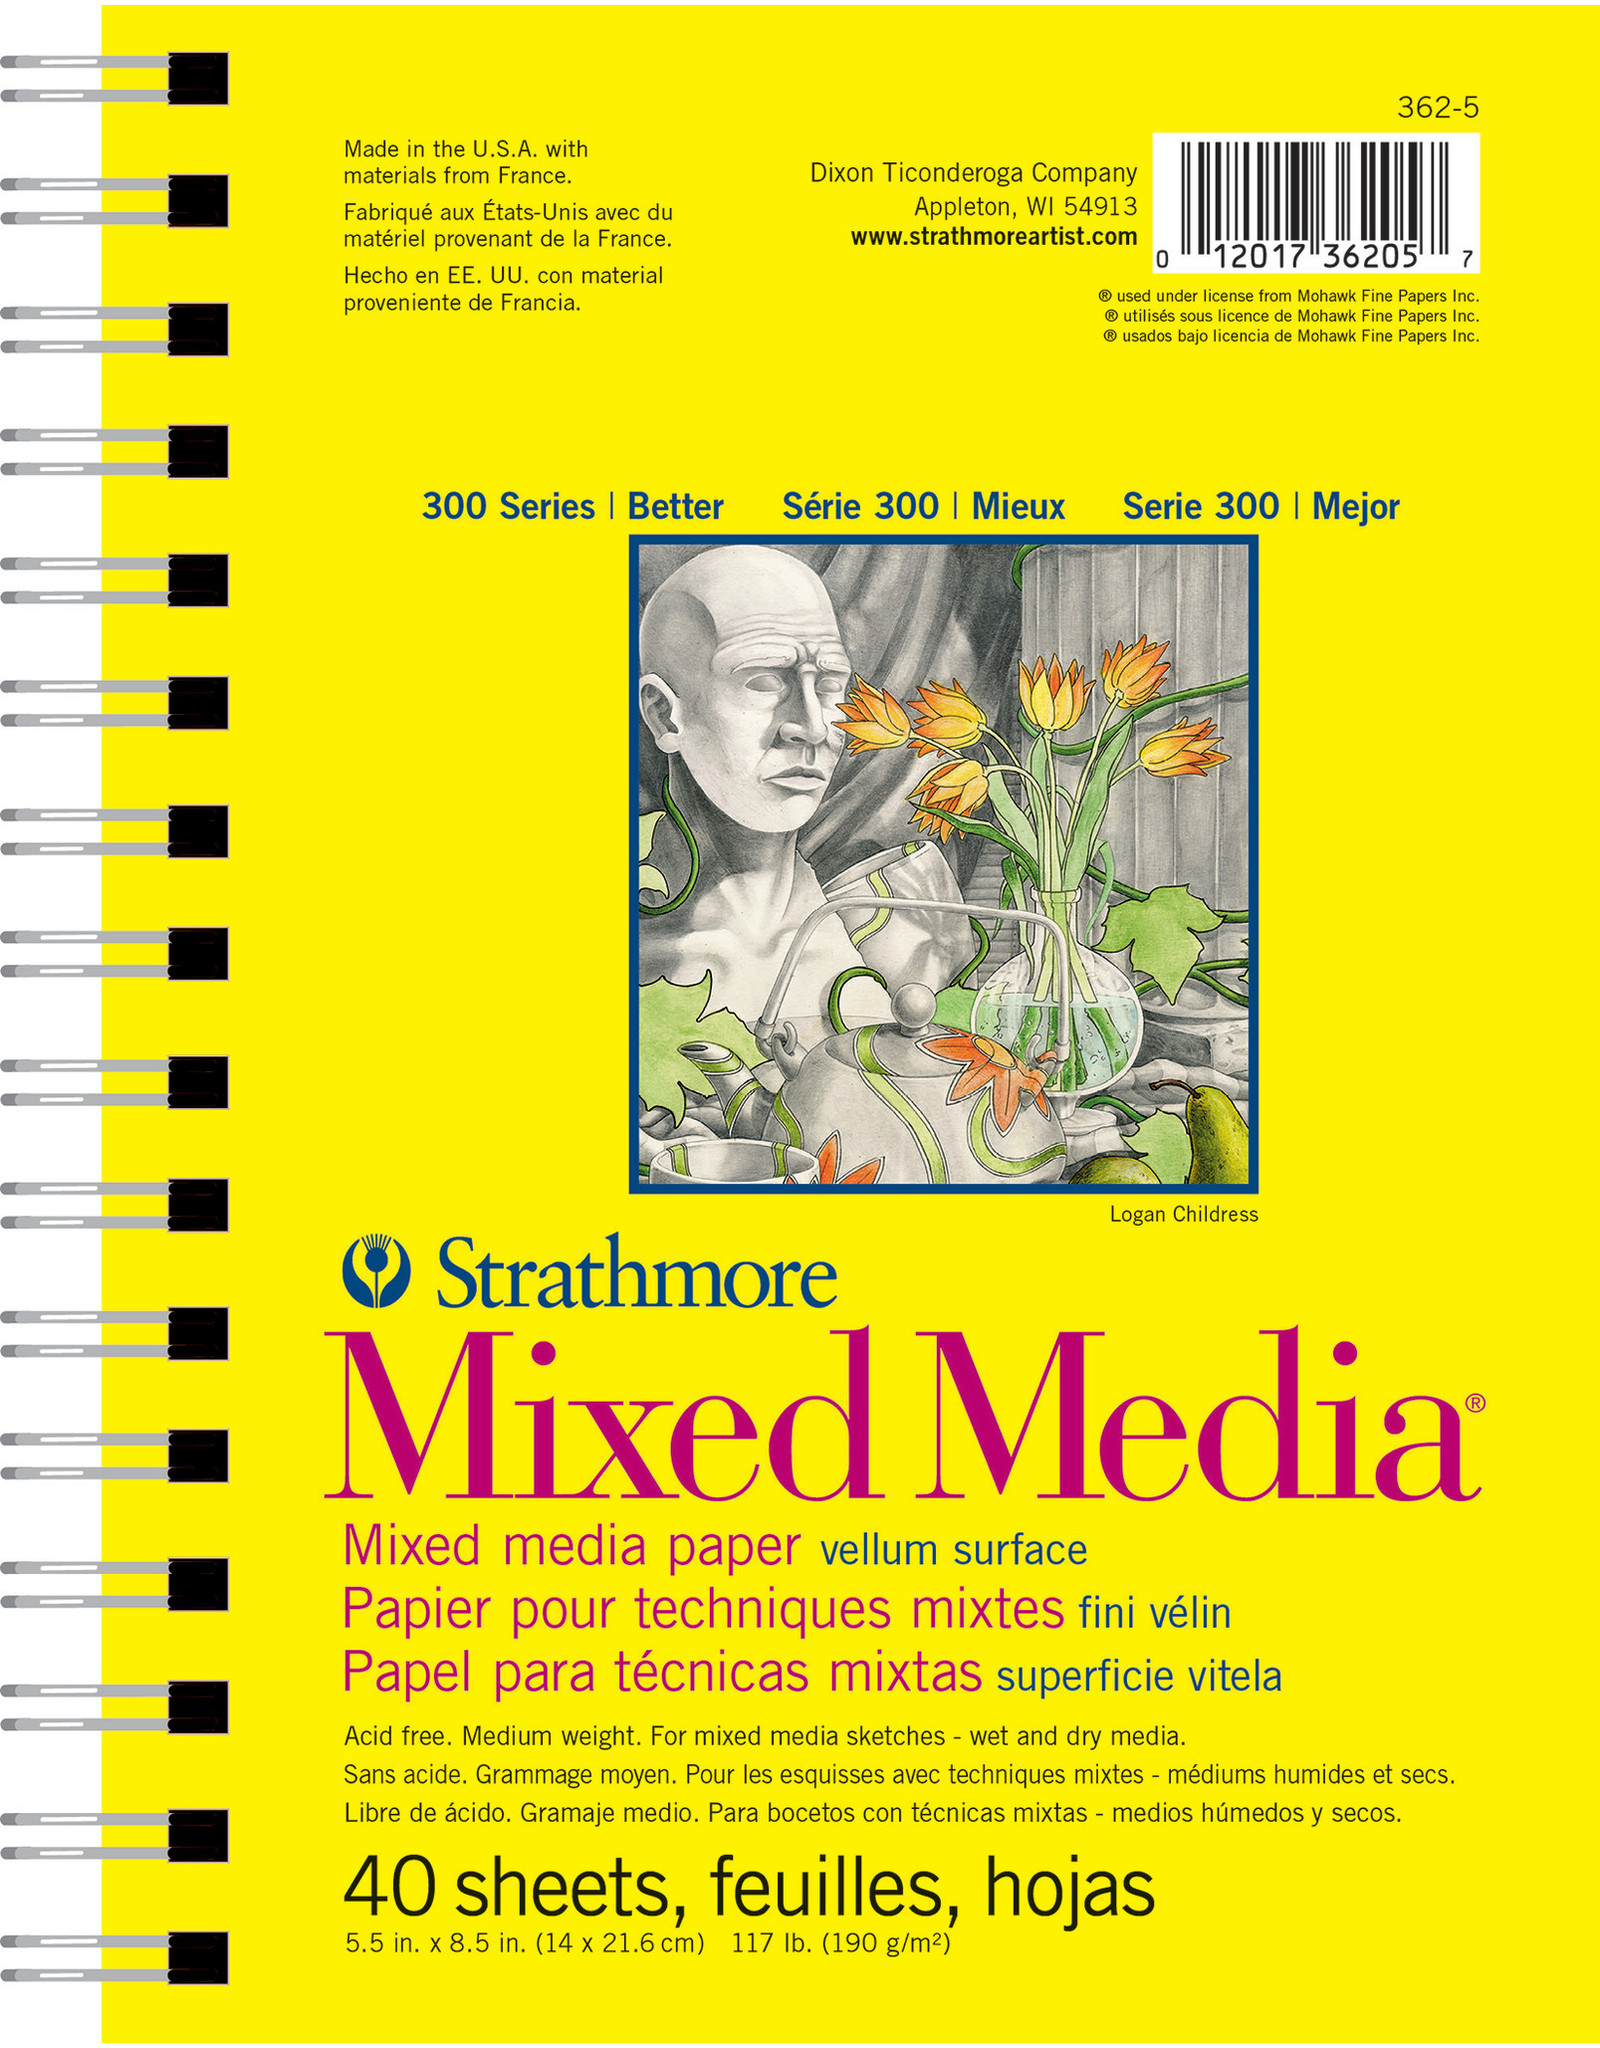 Strathmore Strathmore 300 Mixed Media Pad, 40 Sheets, 5.5” x 8.5”